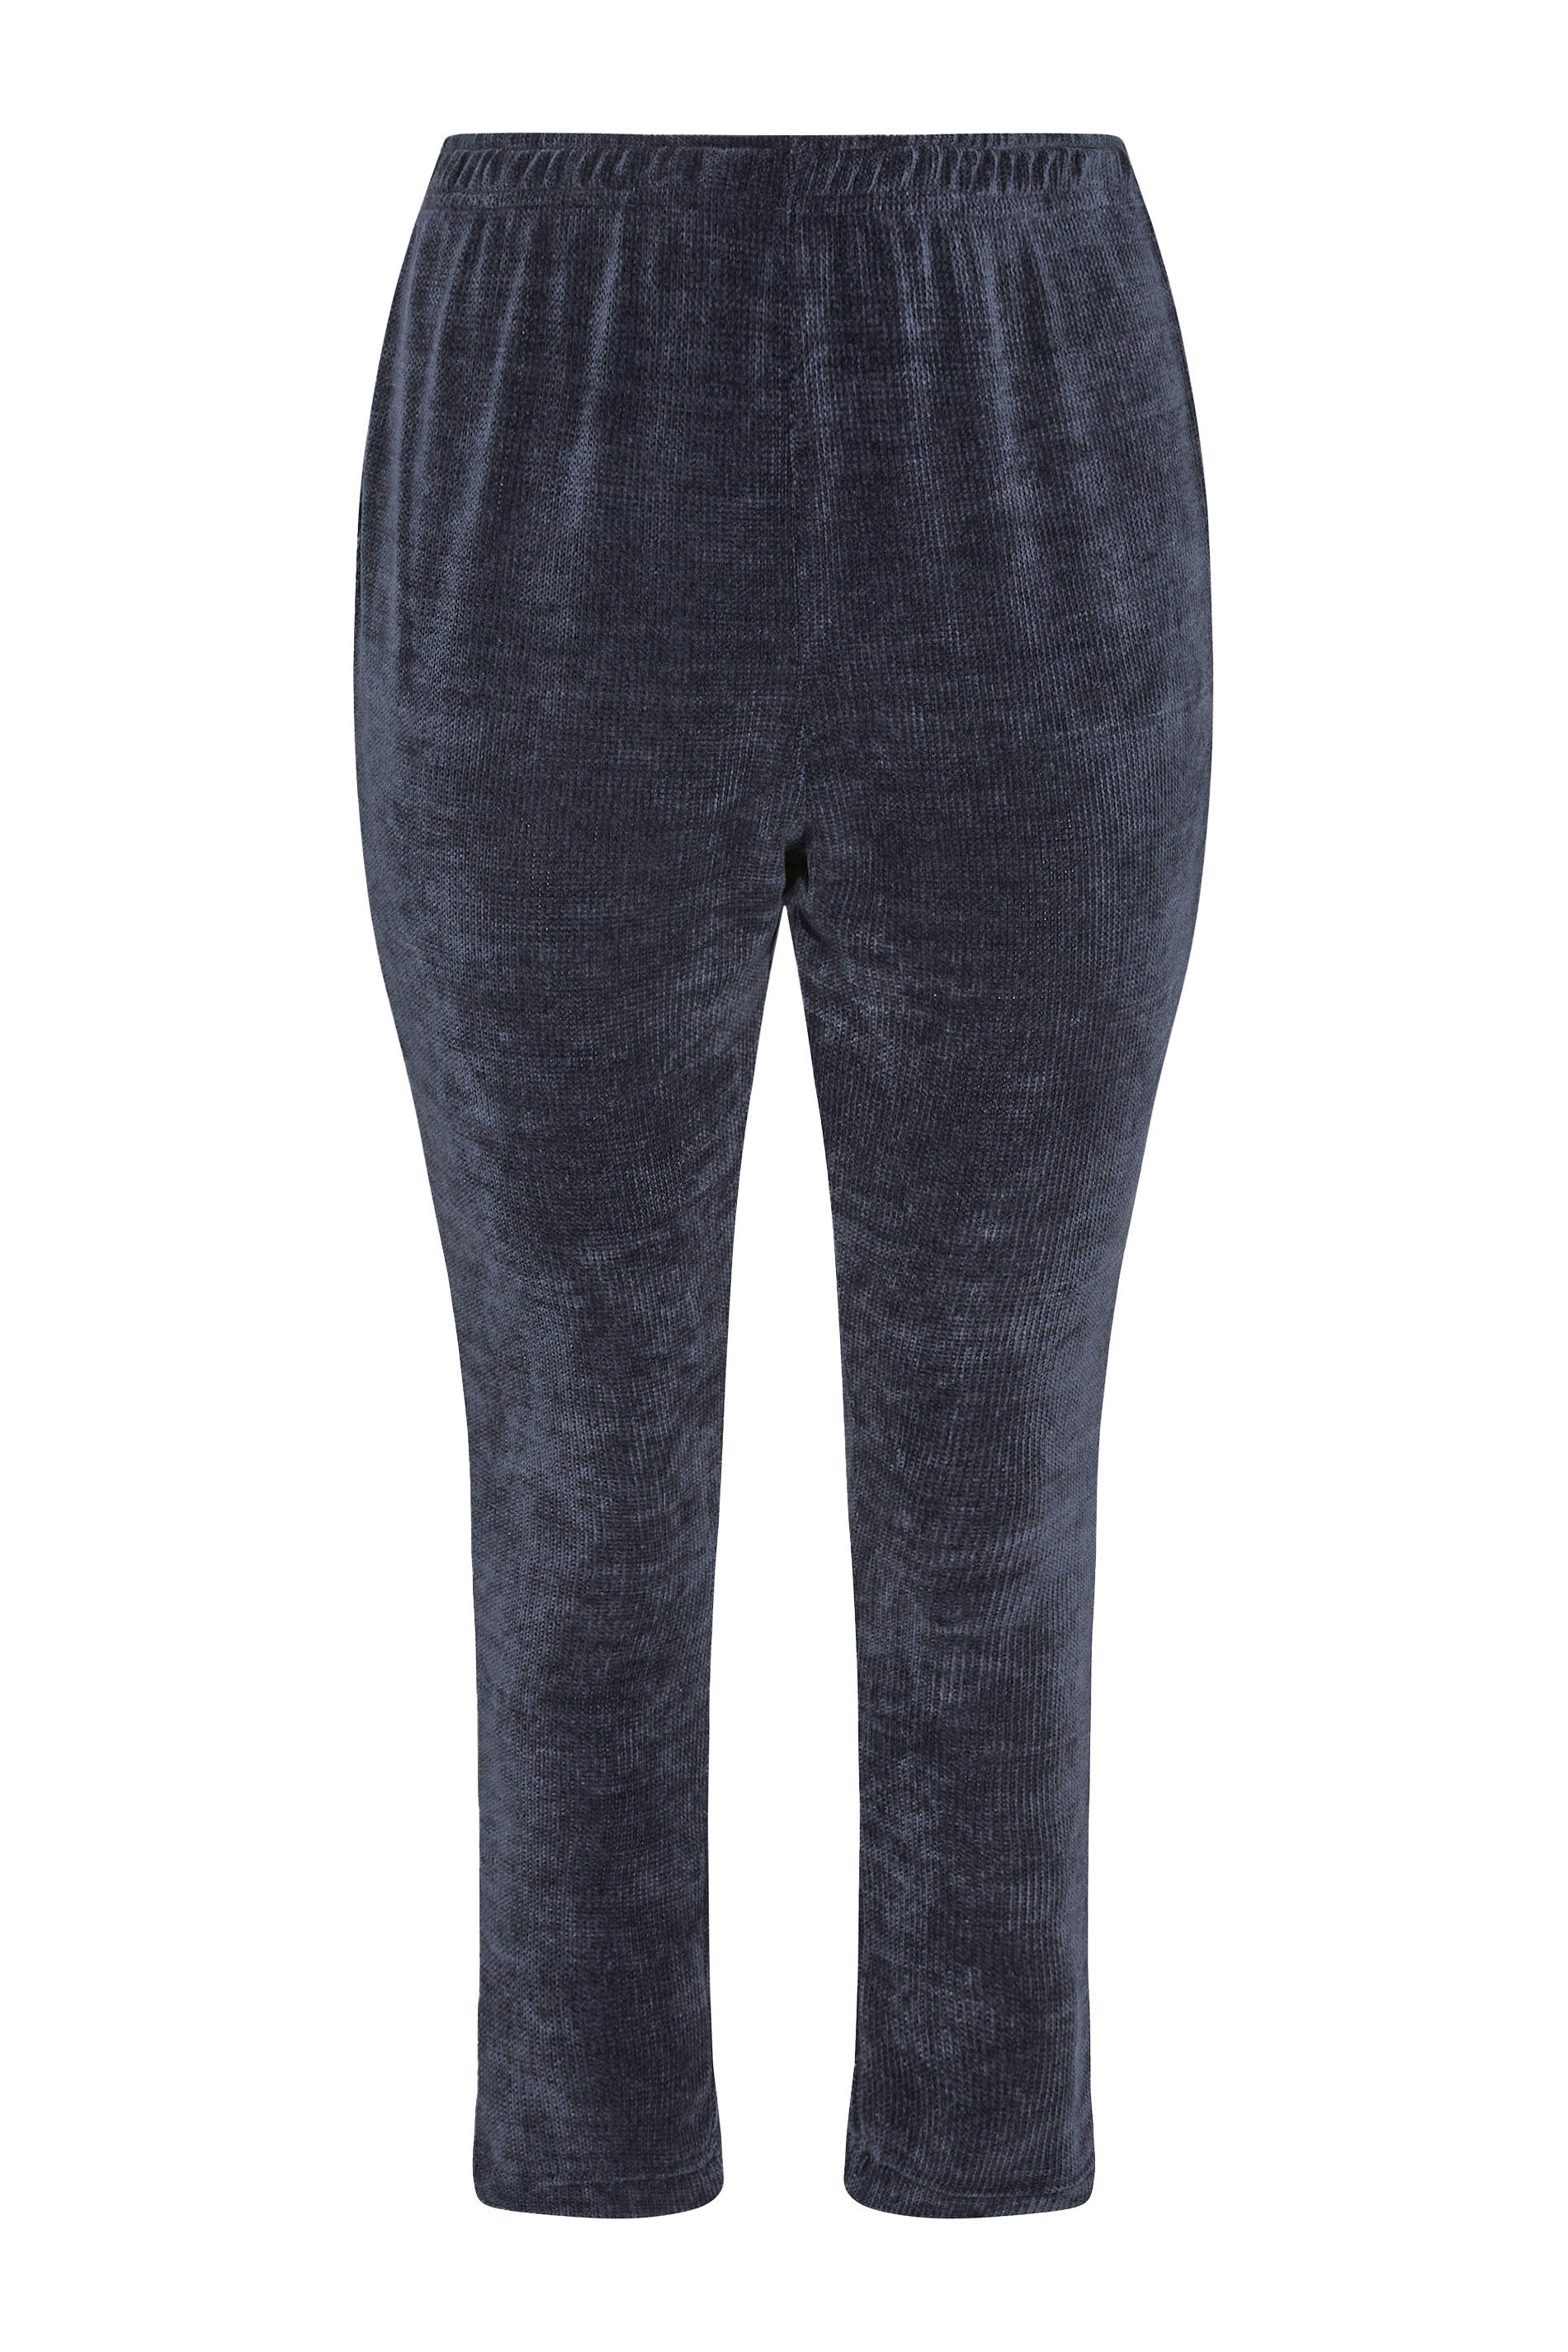 Plus Size Navy Blue Chenille Lounge Joggers | Yours Clothing 3